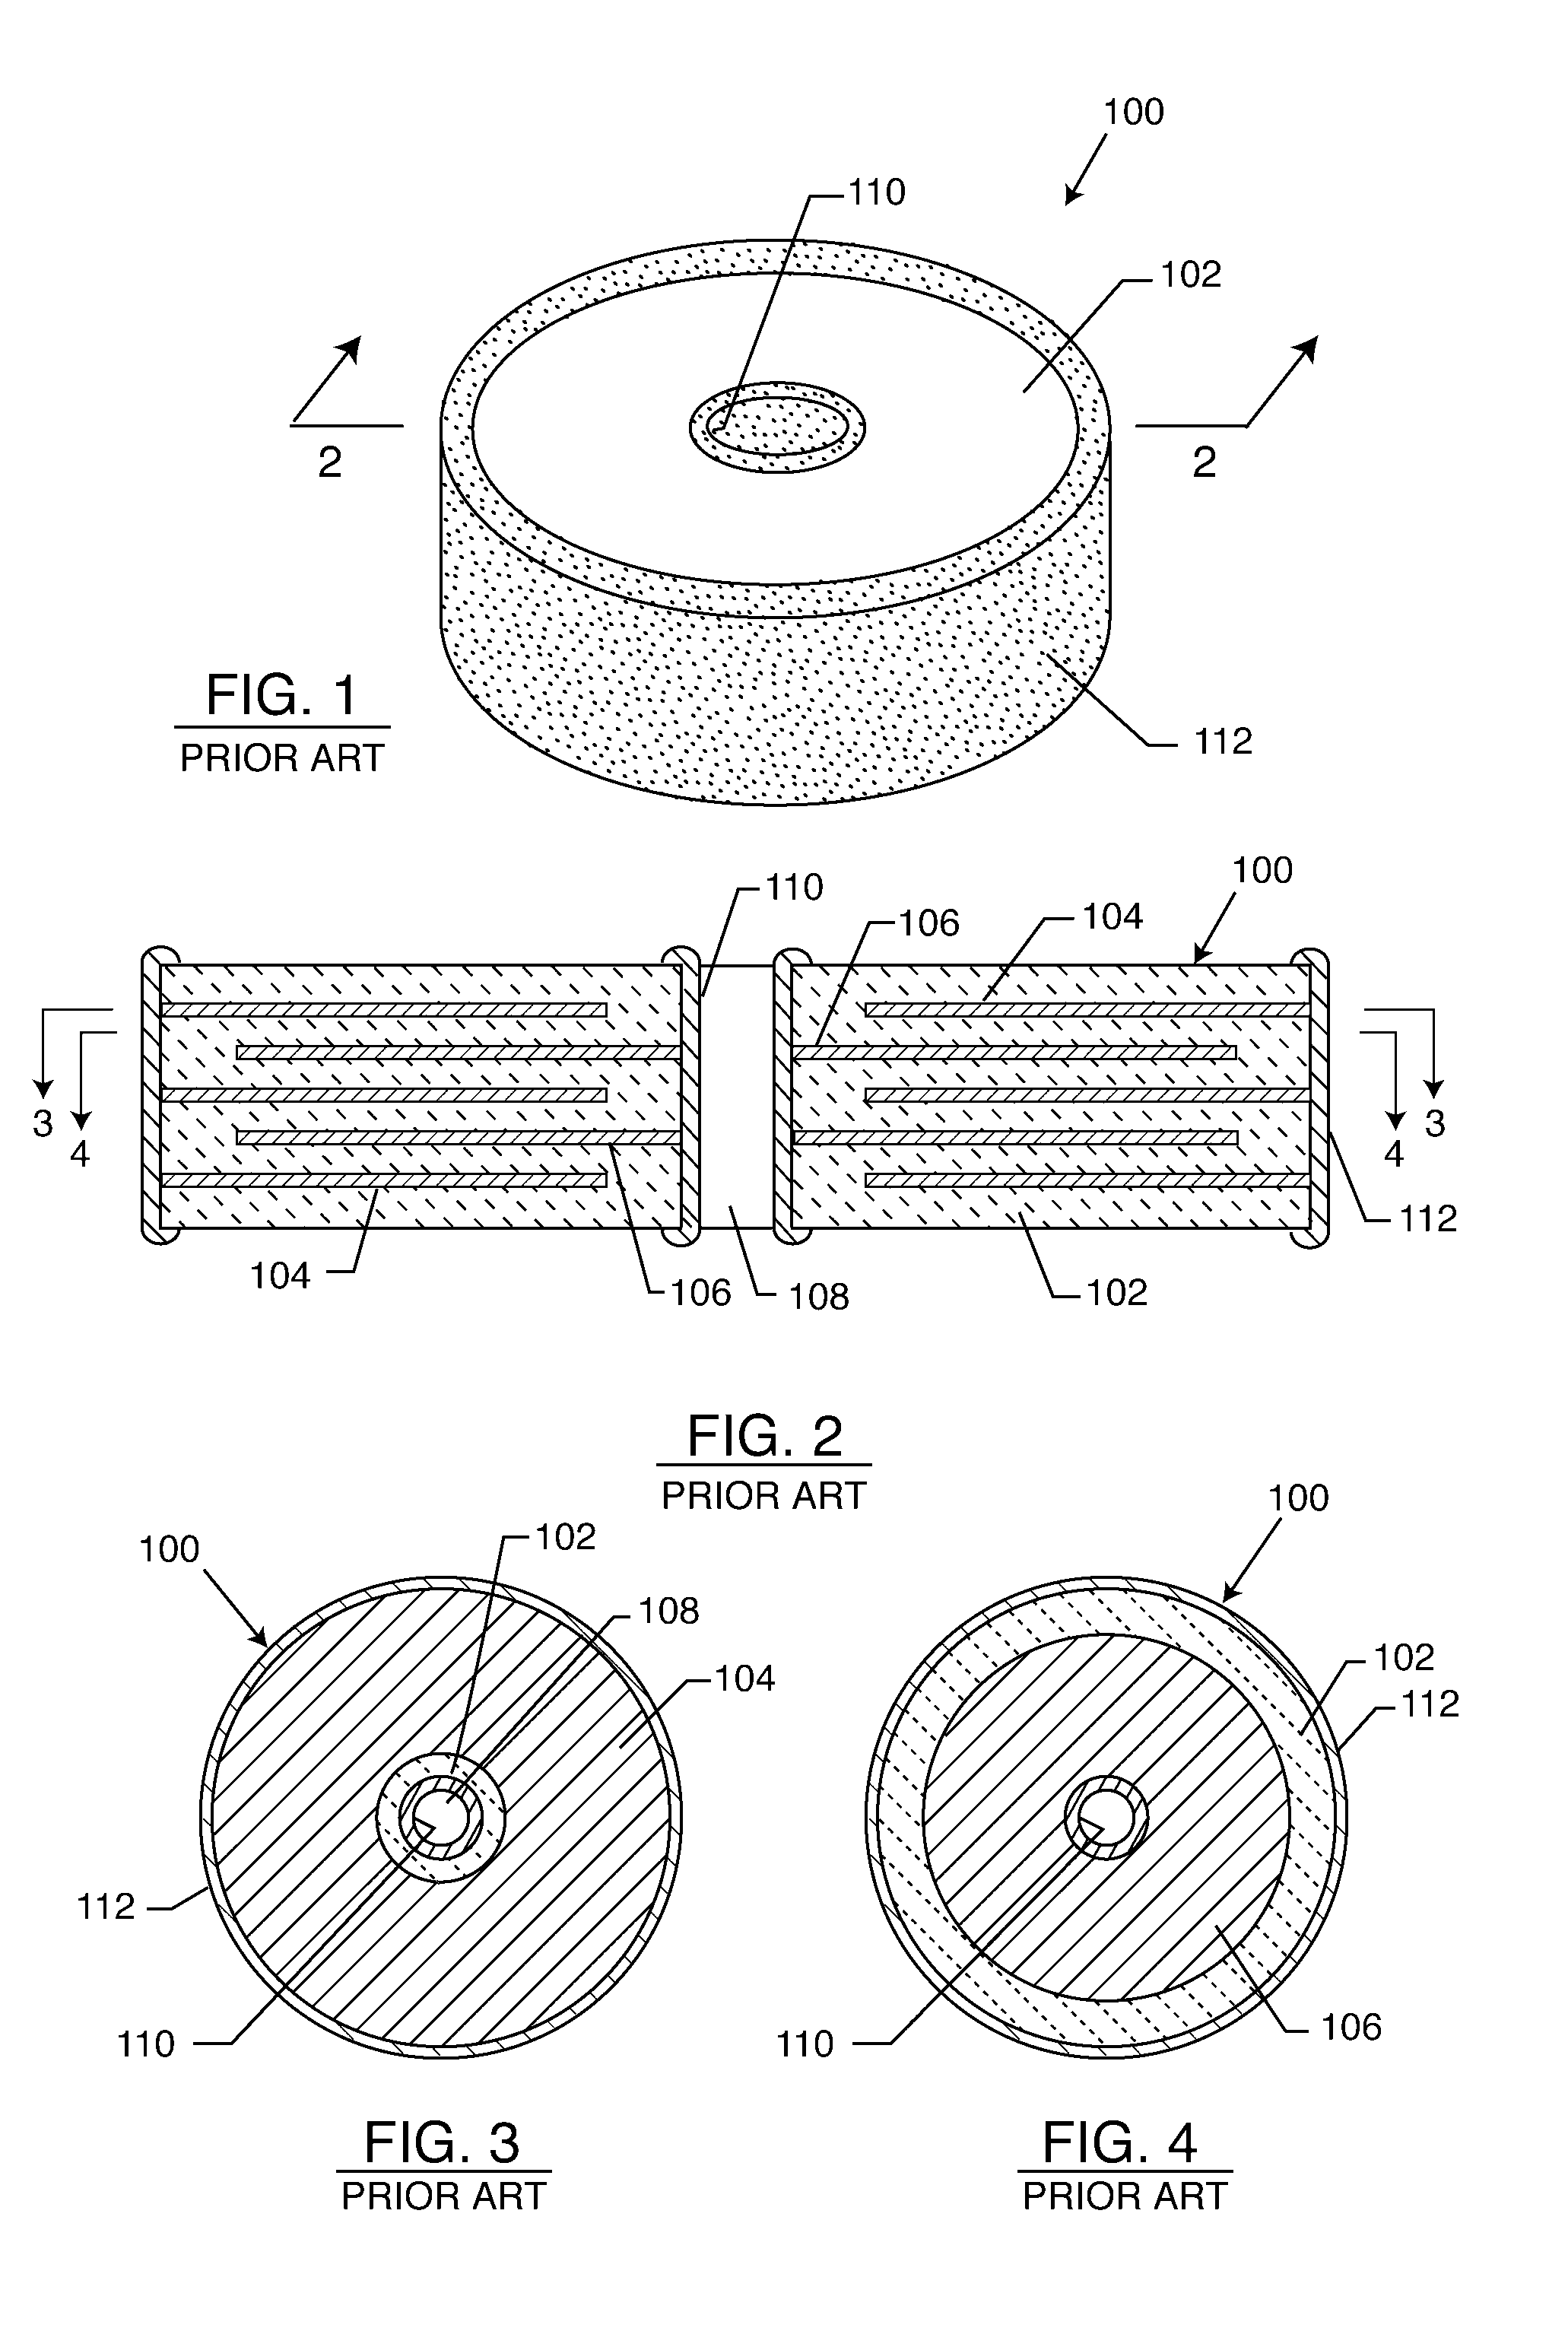 Hybrid spring contact system for EMI filtered hermetic seals for active implantable medical devices